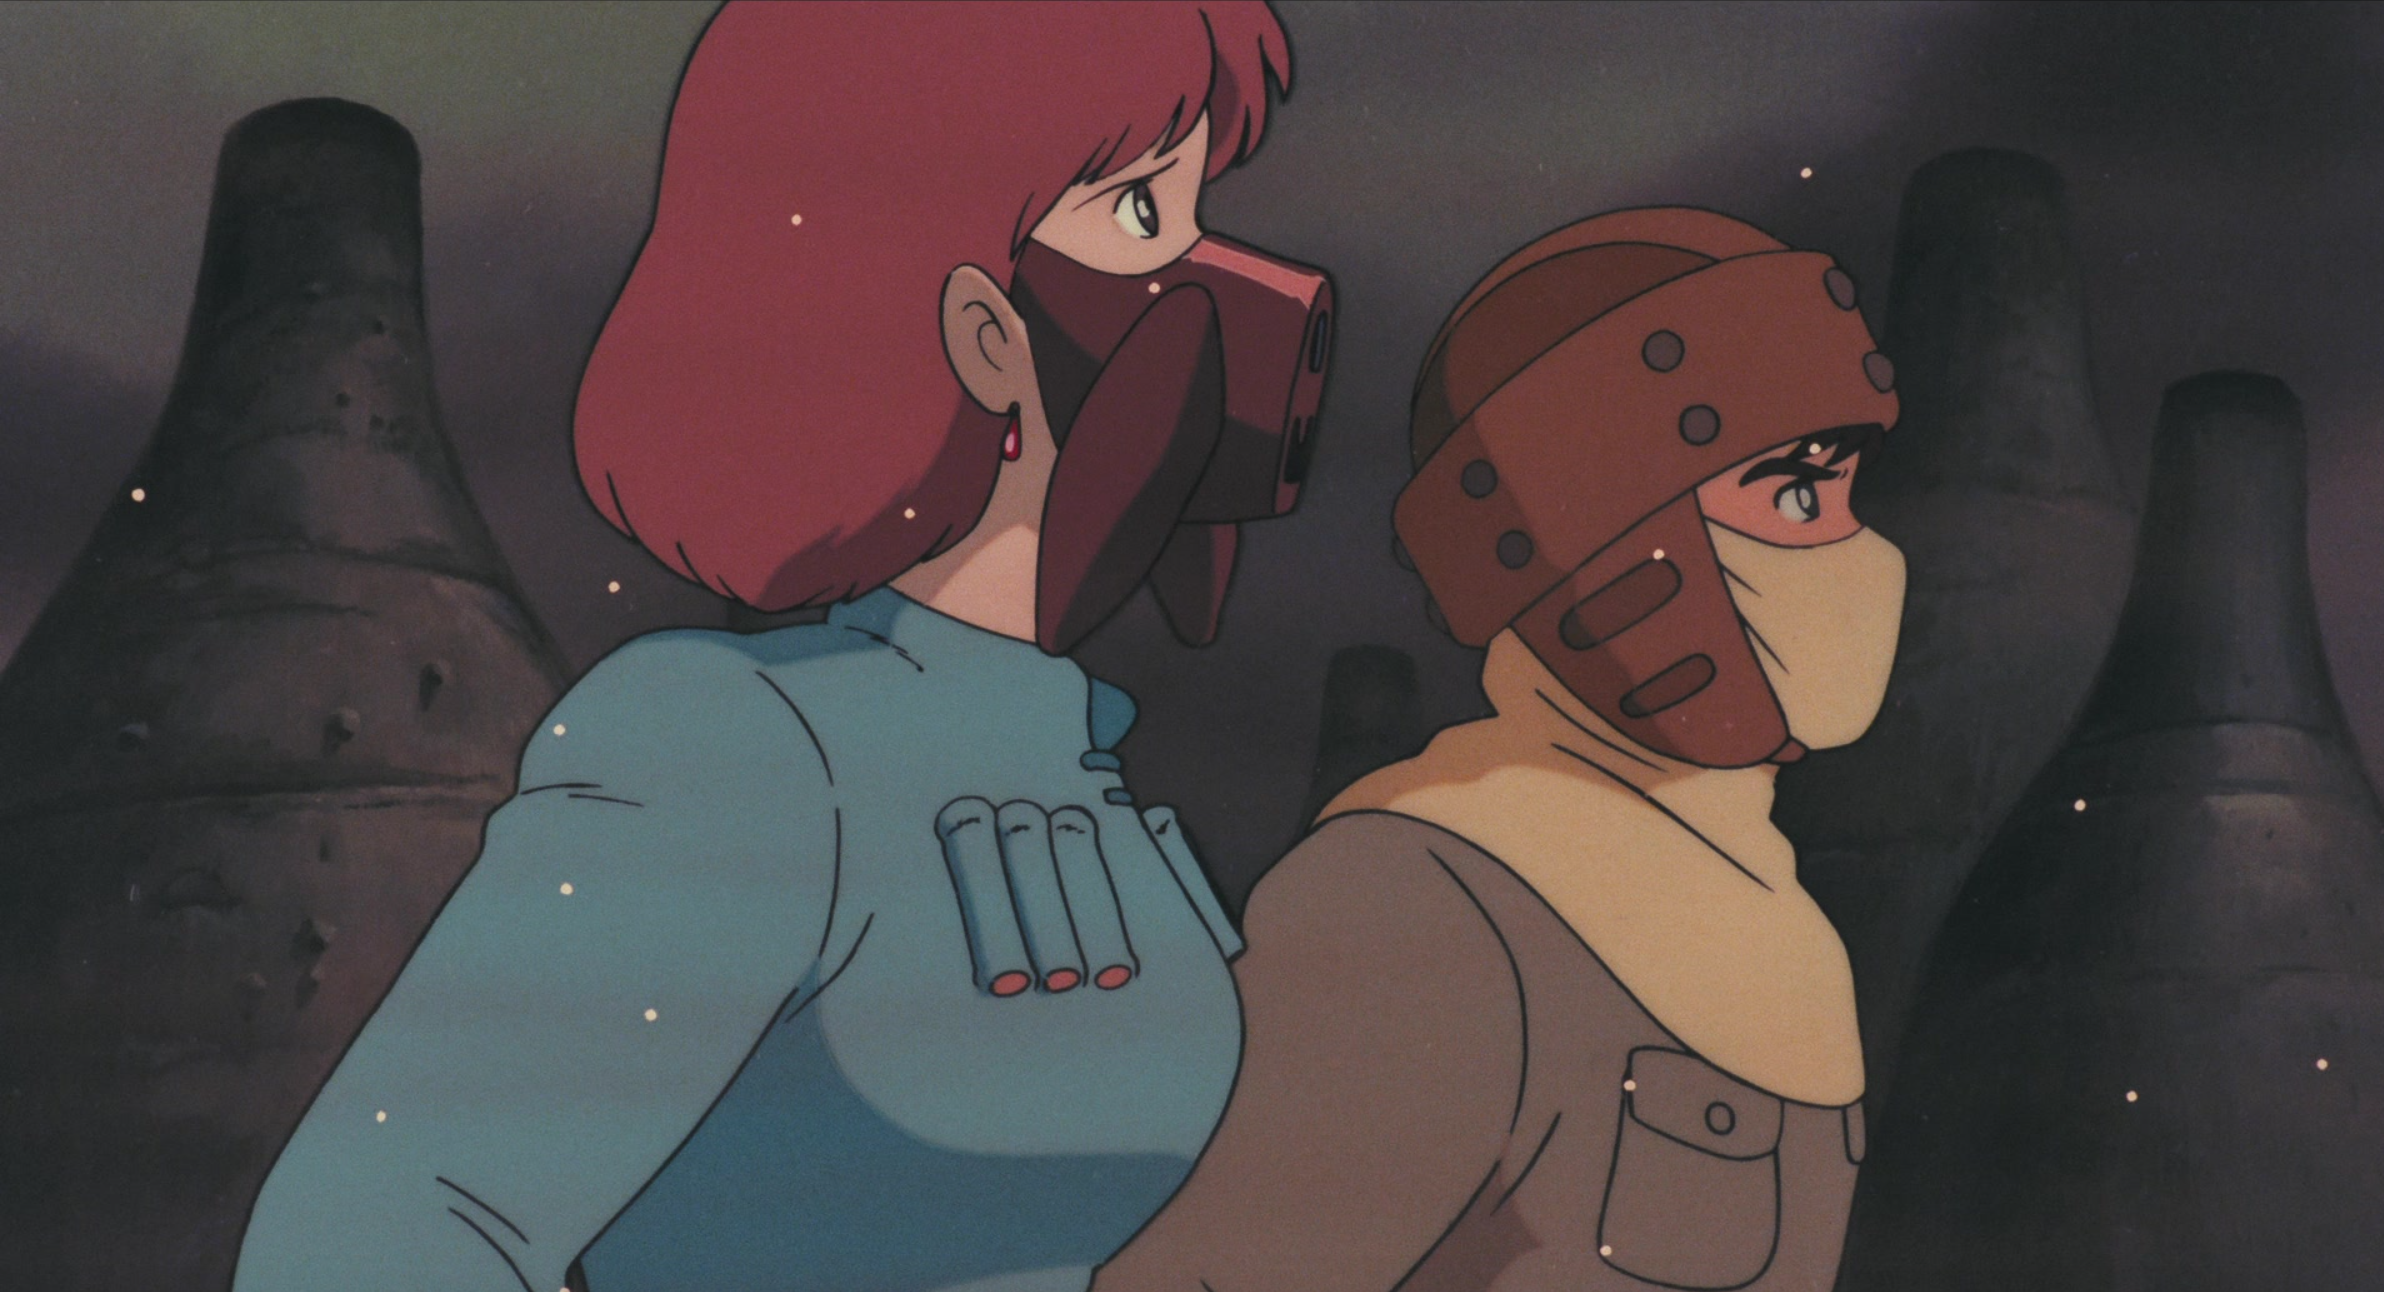 The movie shifts its focus back to Nausicaä and Asbel, who are approaching Asbel...